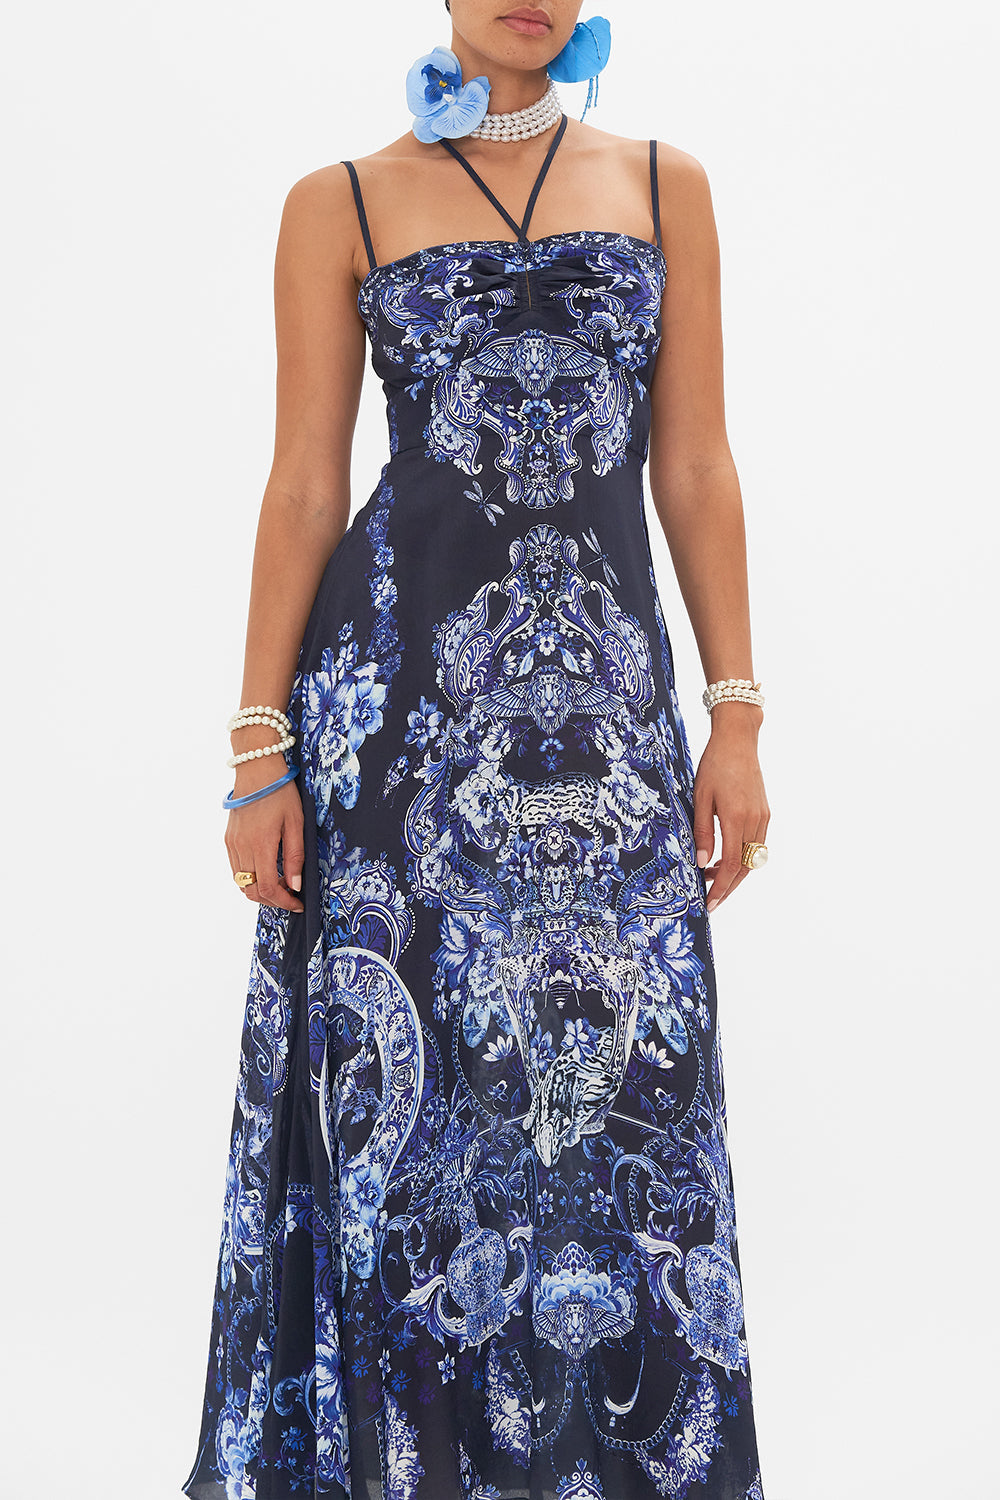 Crop view of model wearing CAMILLA silk dress in Delft Dynasty print